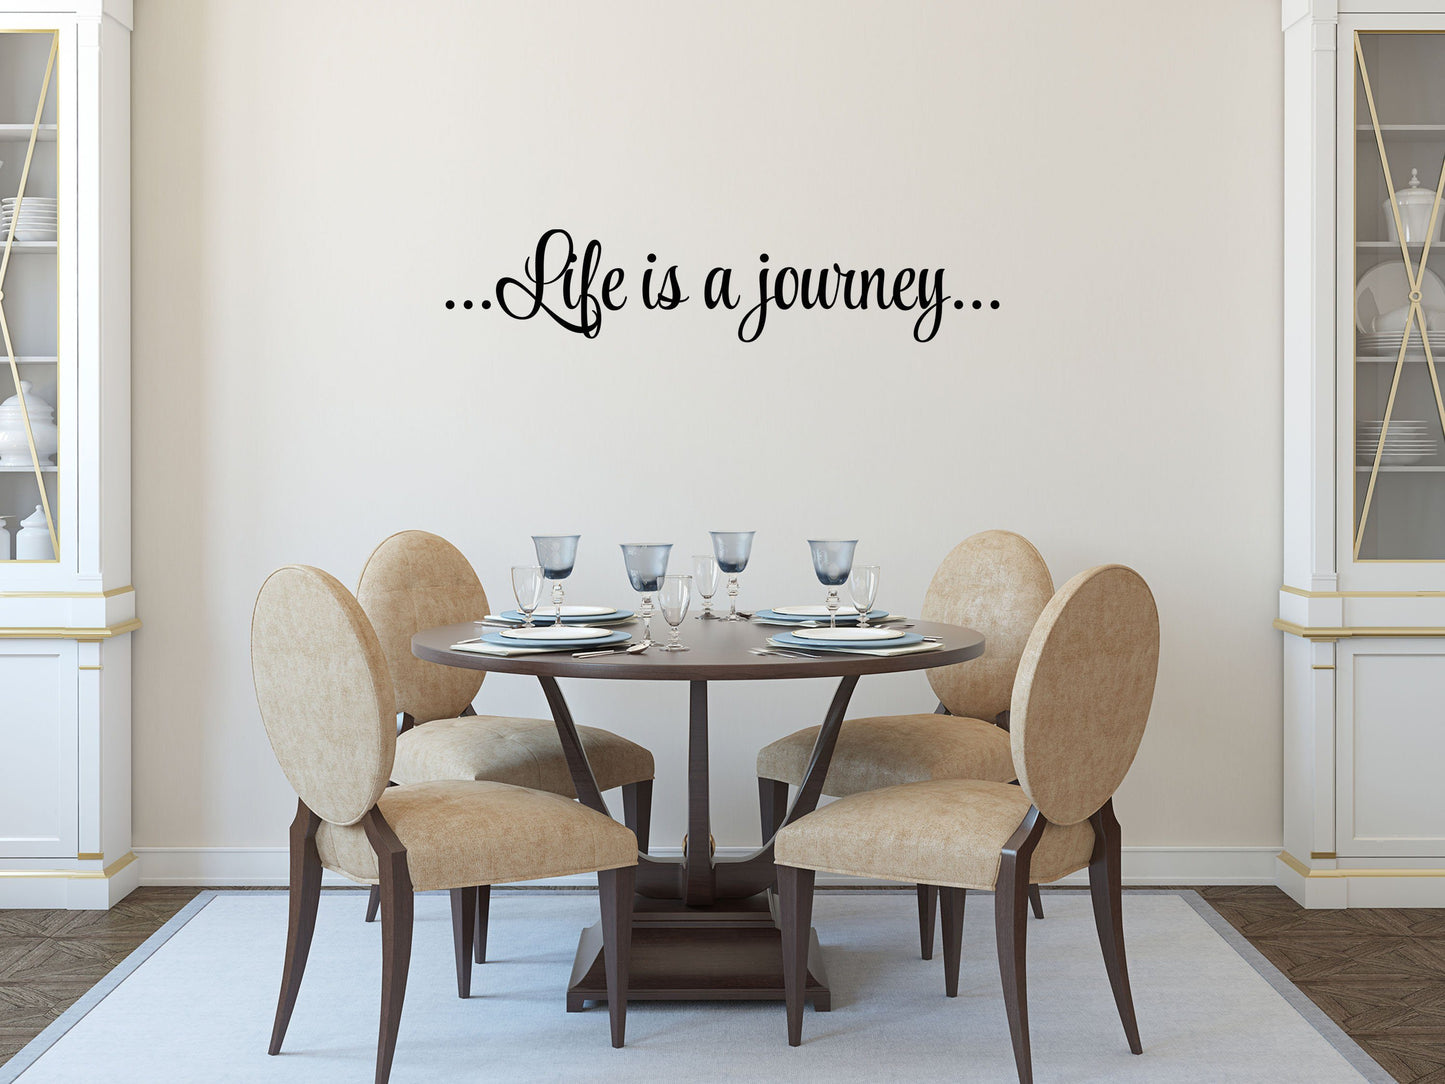 Life Is A Journey Vinyl Wall Decal - Inspirational Wall Signs Vinyl Wall Decal Done 